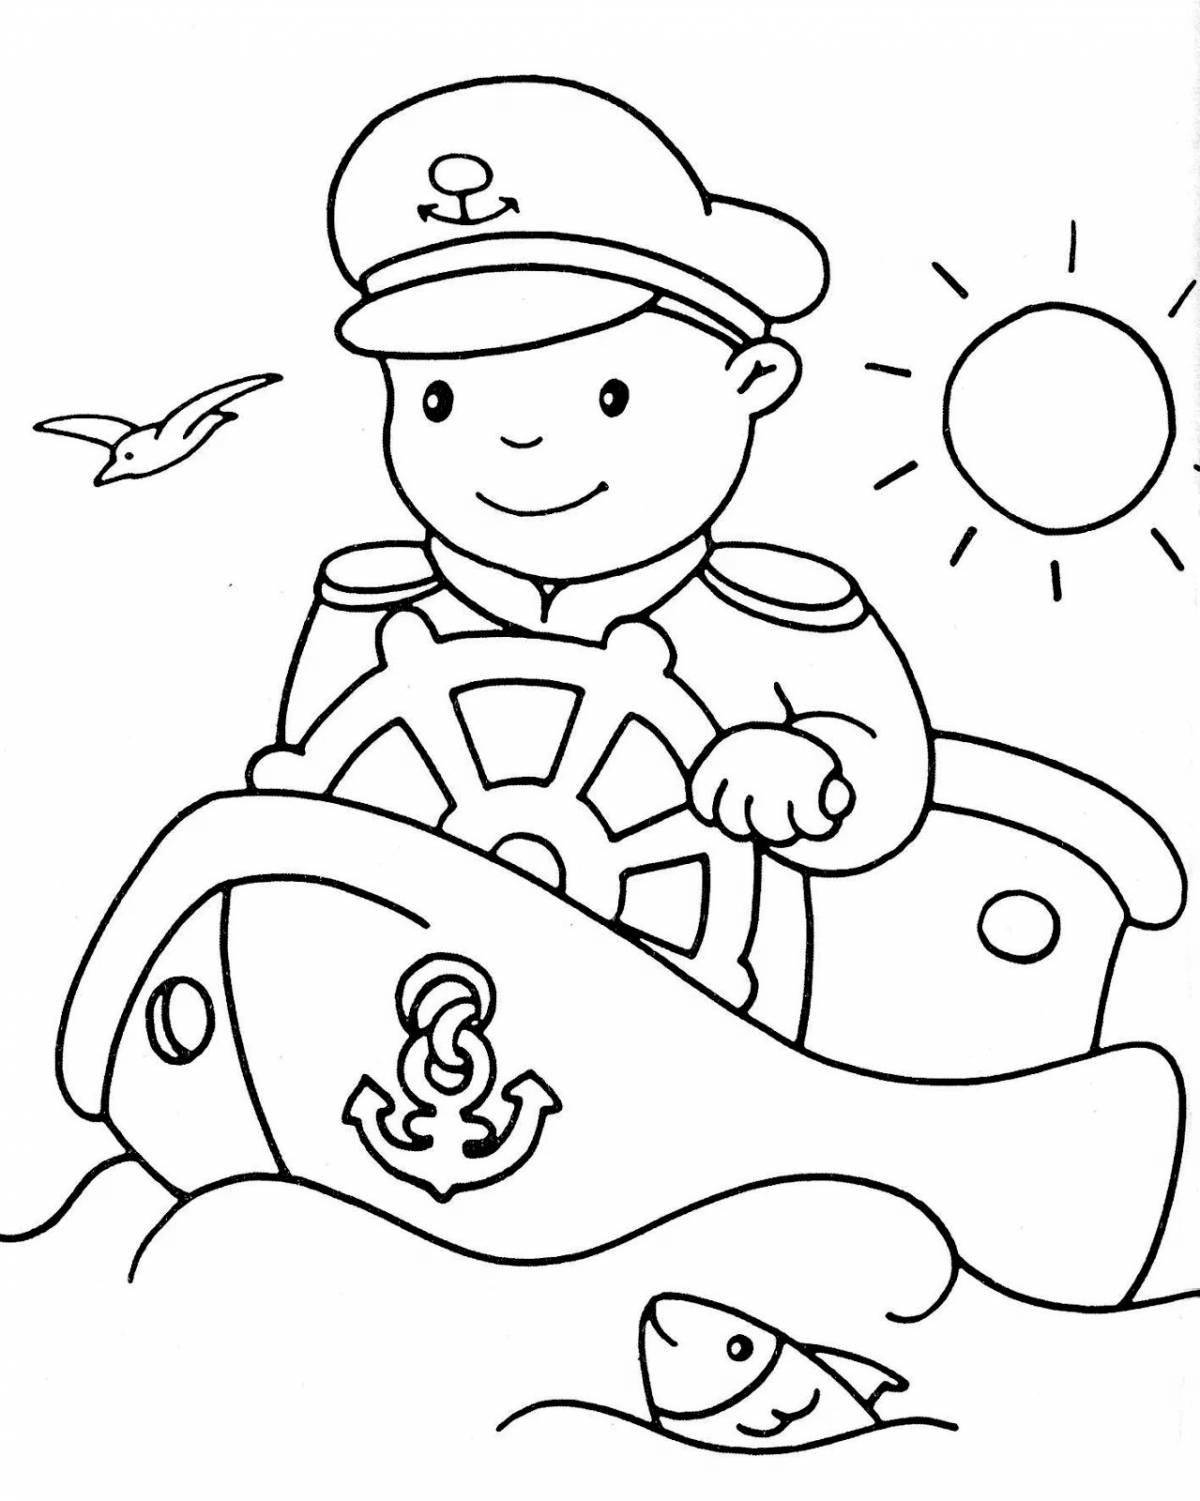 Fun February coloring book for kids